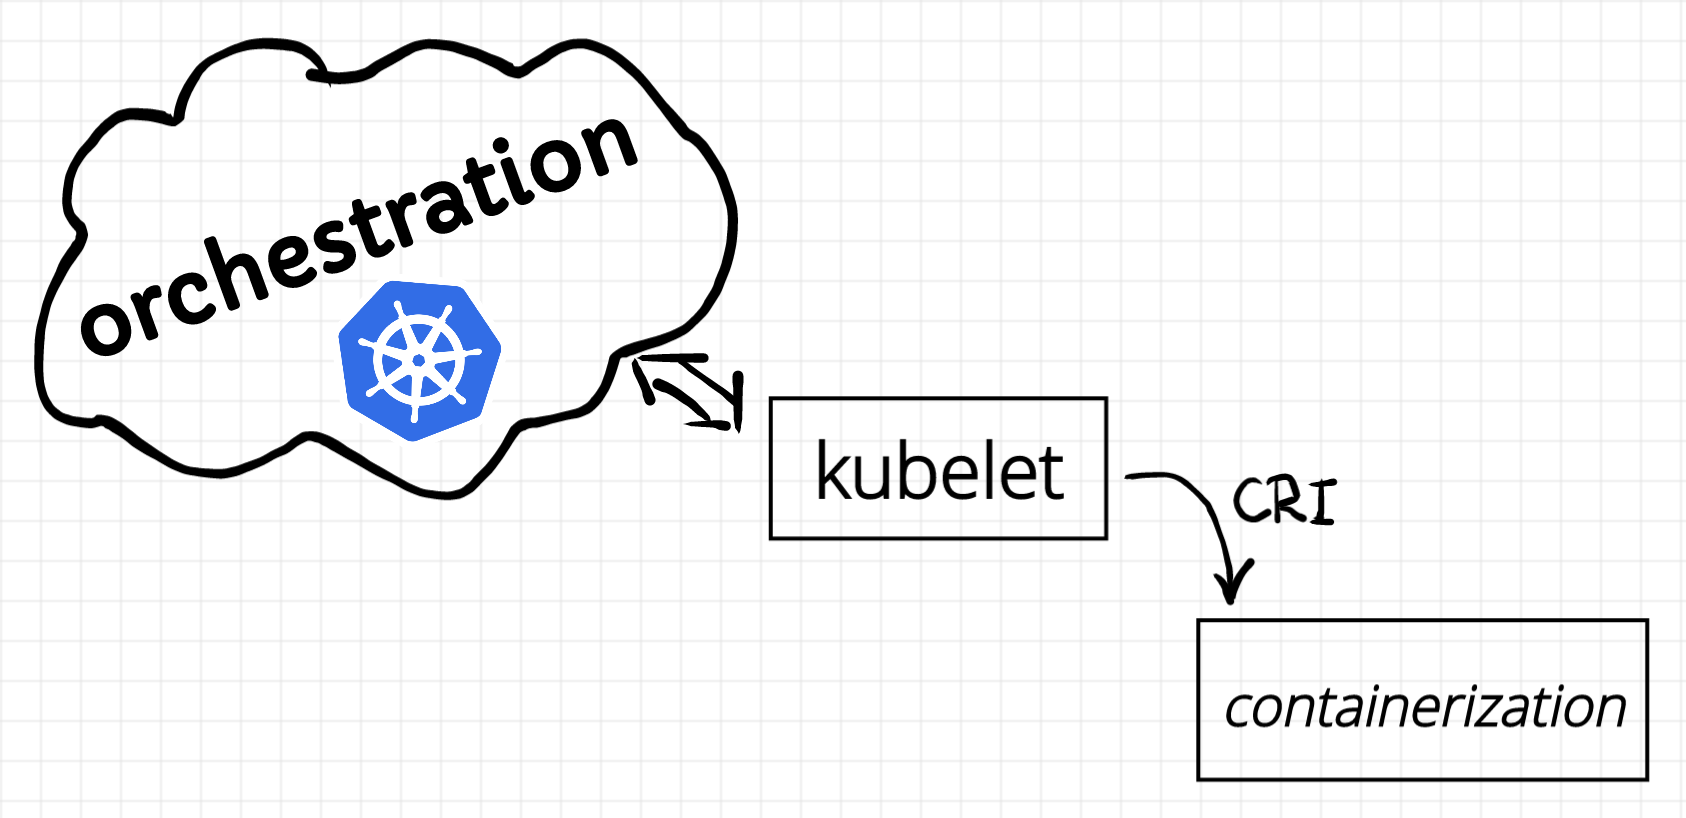 Orchestration is one kubelet away from Containerization